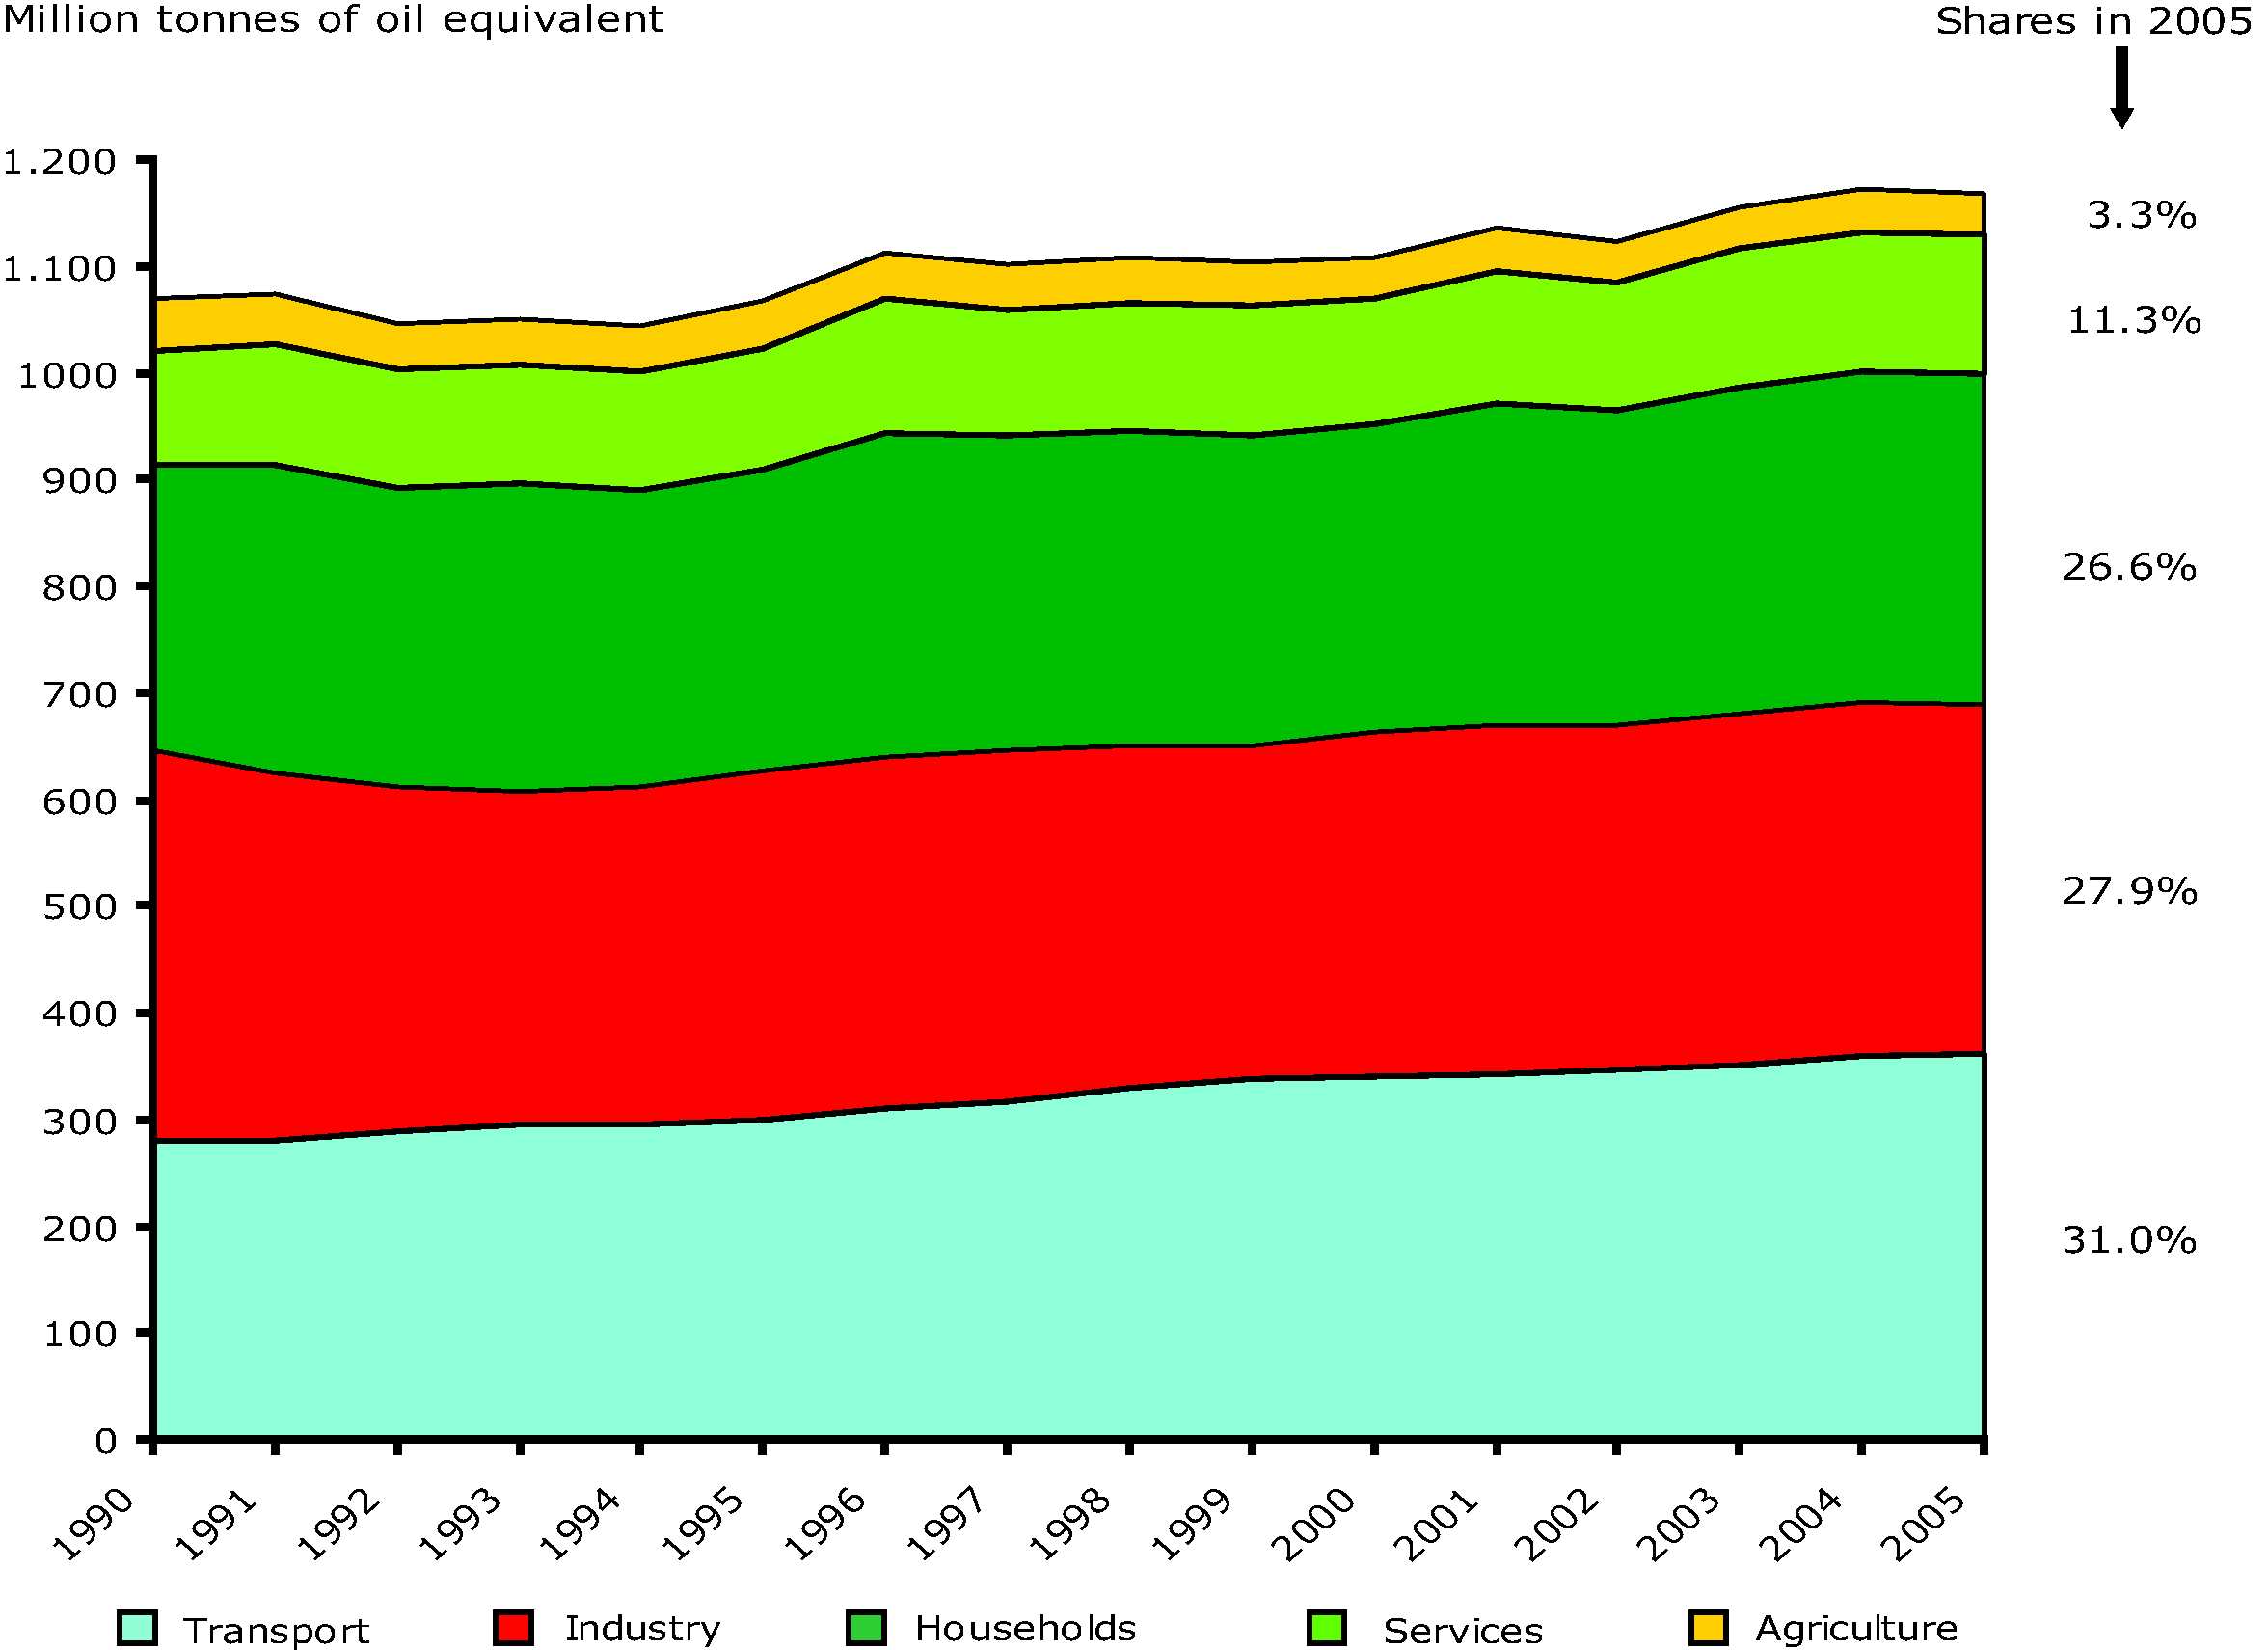 Final energy consumption by sector in the EU-27, 1990-2005